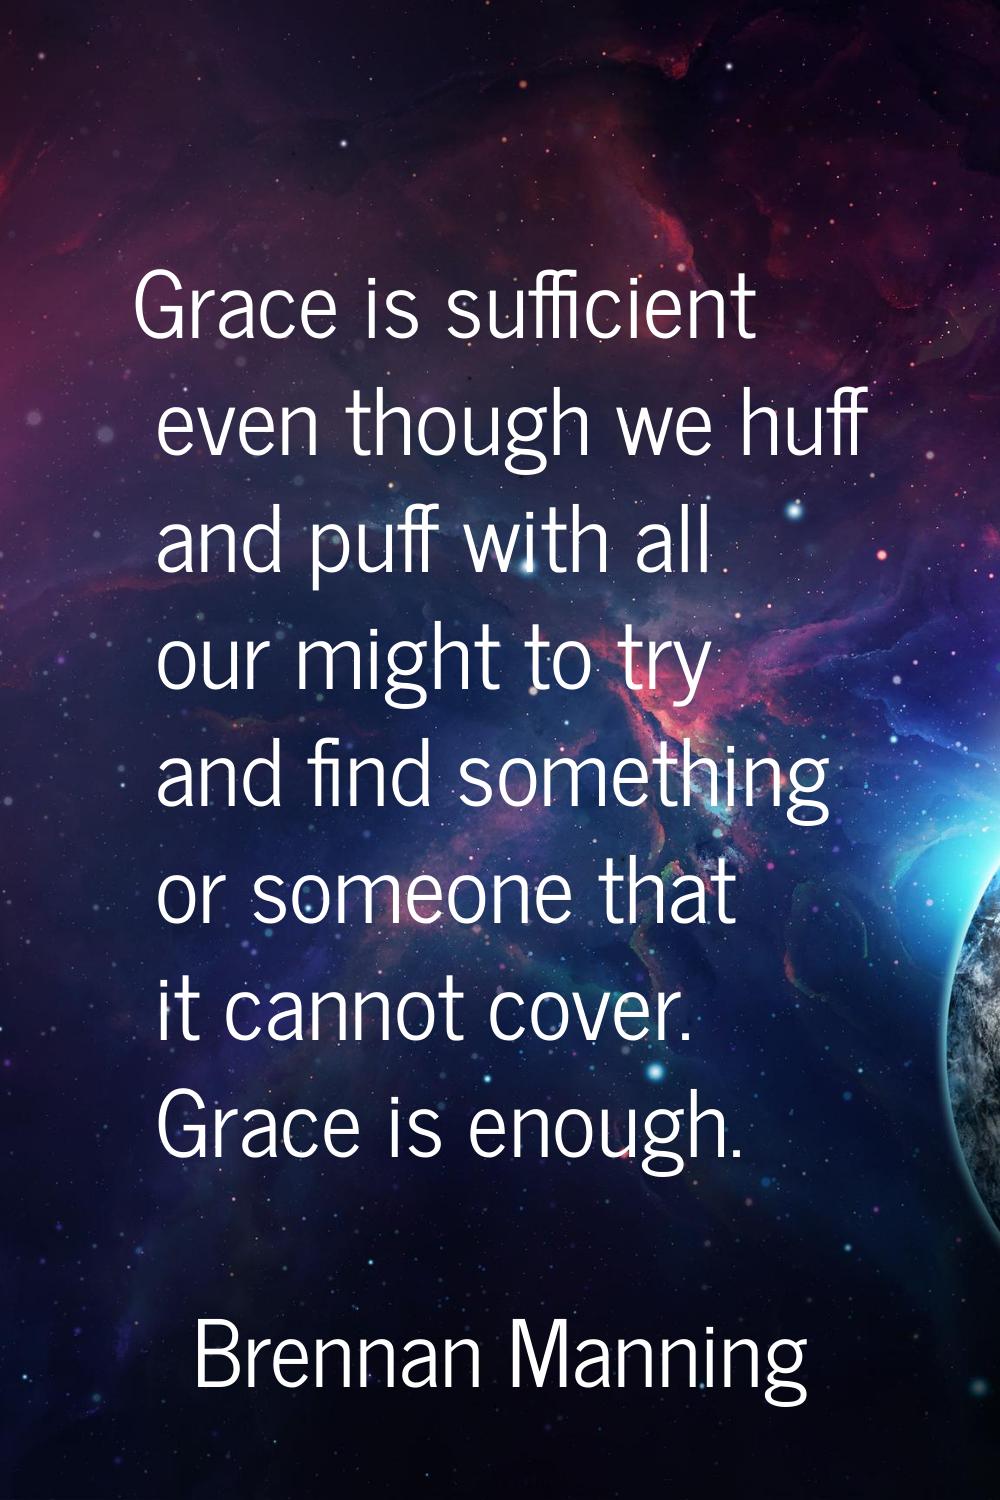 Grace is sufficient even though we huff and puff with all our might to try and find something or so